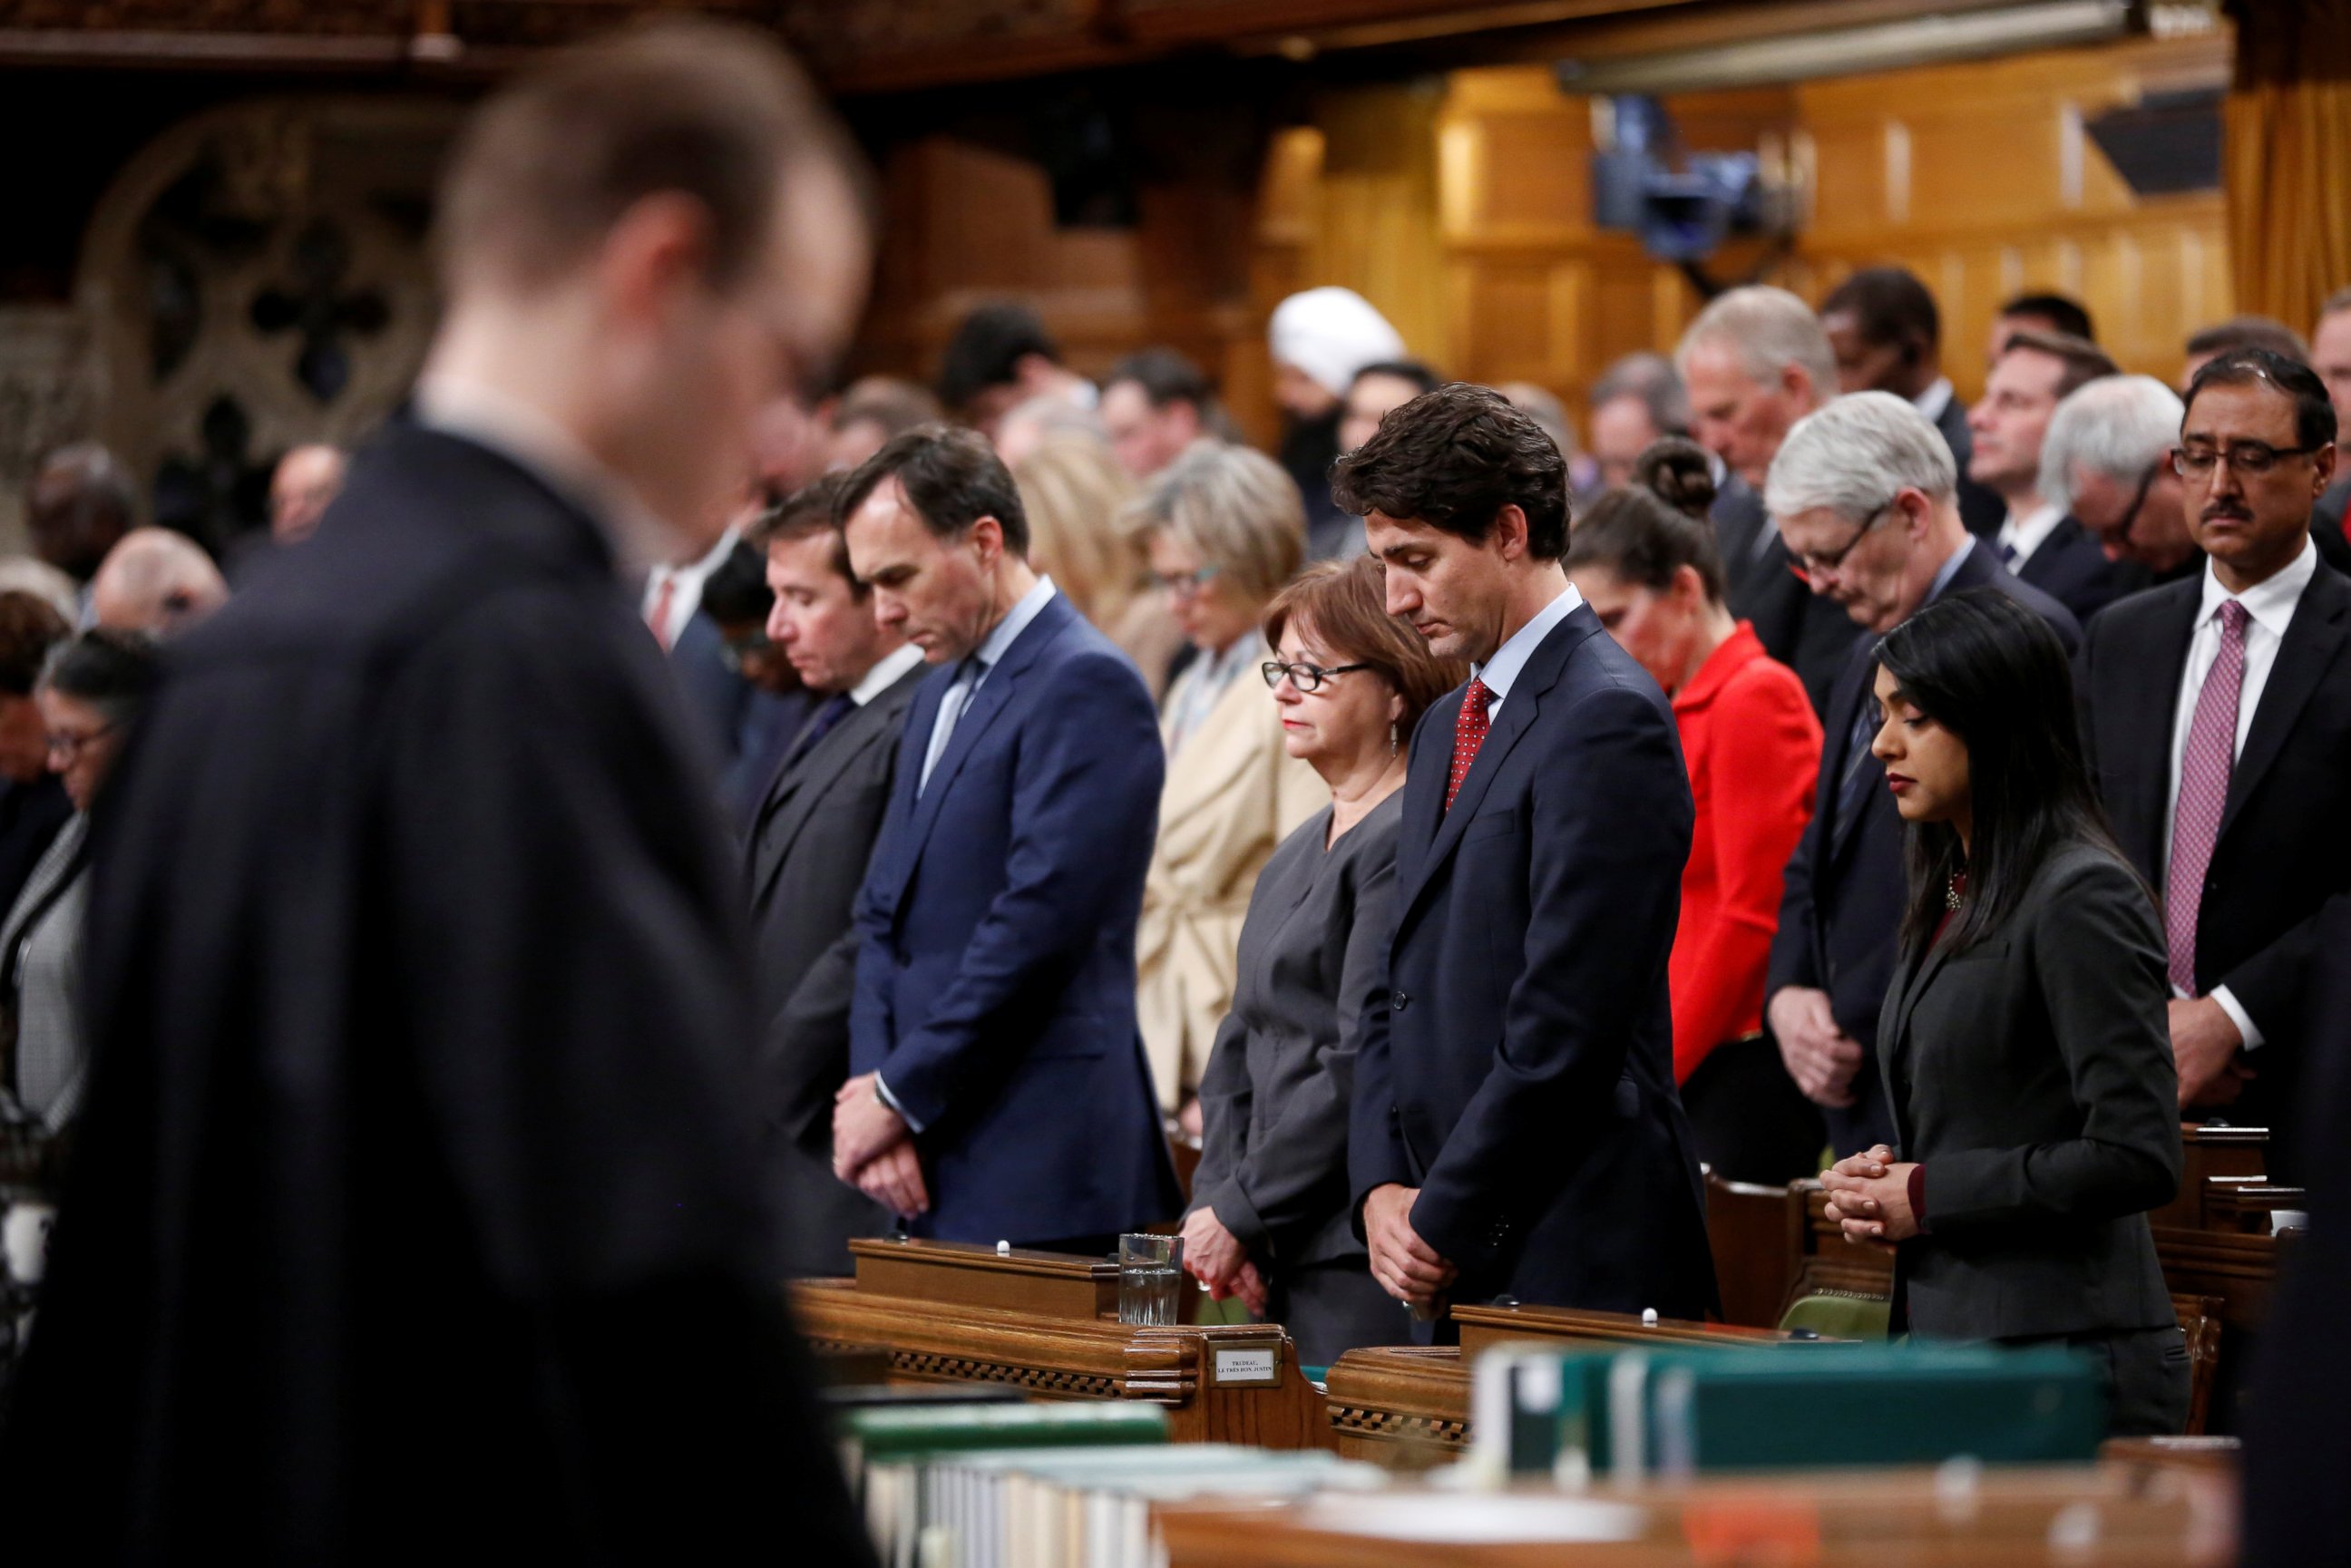 PHOTO: Canada's Prime Minister Justin Trudeau joins fellow MPs in a moment of silence after delivering a statement on a deadly shooting at a Quebec City mosque, in the House of Commons on Parliament Hill in Ottawa, Ontario, Canada, Jan. 30, 2017.